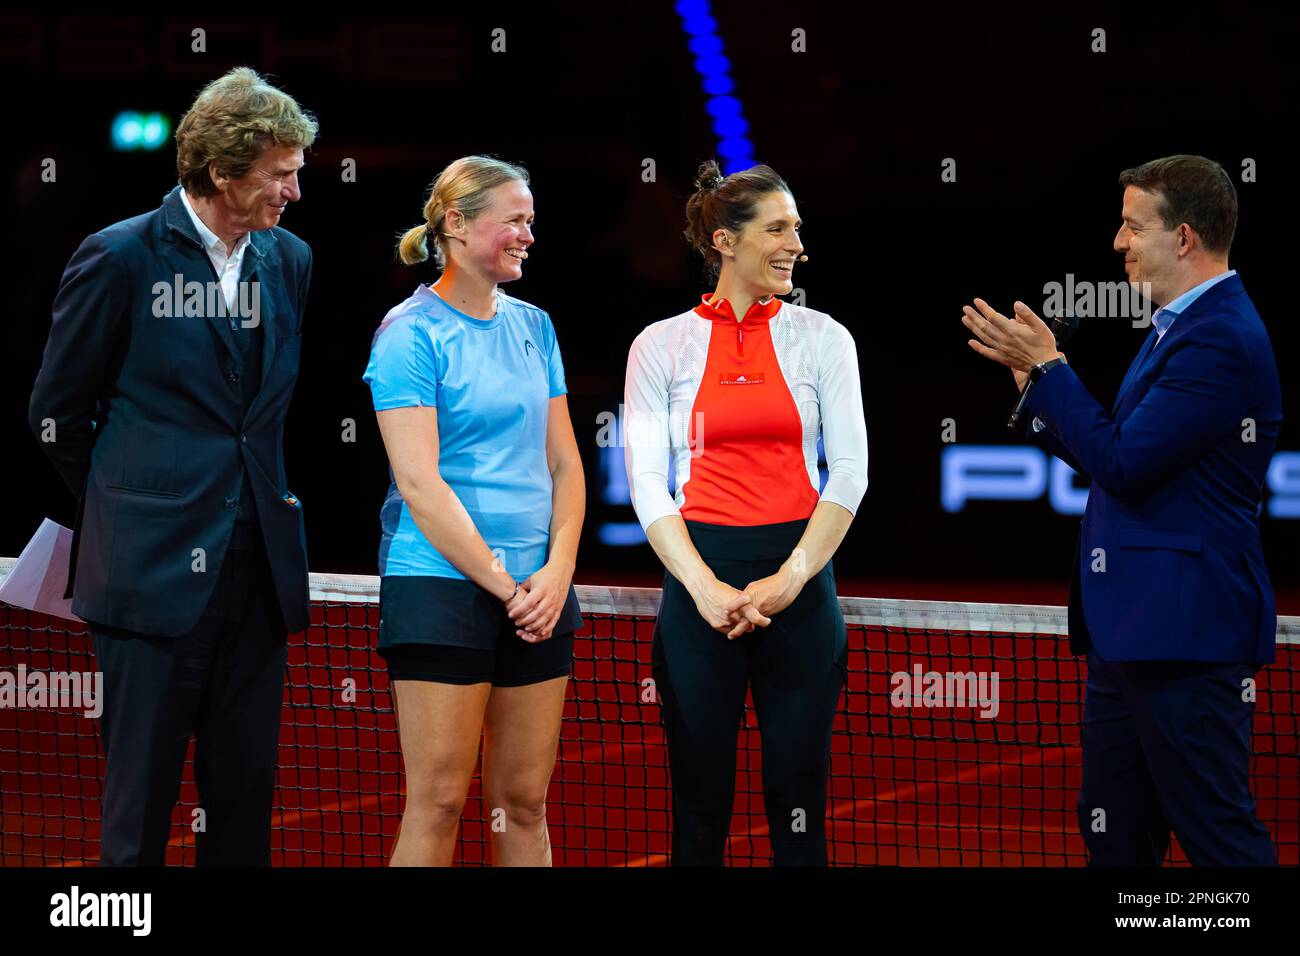 Anna-Lena Groenefeld of Germany & Andrea Petkovic during the ceremony commemorating their careers at the 2023 Porsche Tennis Grand Prix, WTA 500 tennis tournament on April 17, 2023 in Stuttgart, Germany - Photo: Rob Prange/DPPI/LiveMedia Stock Photo